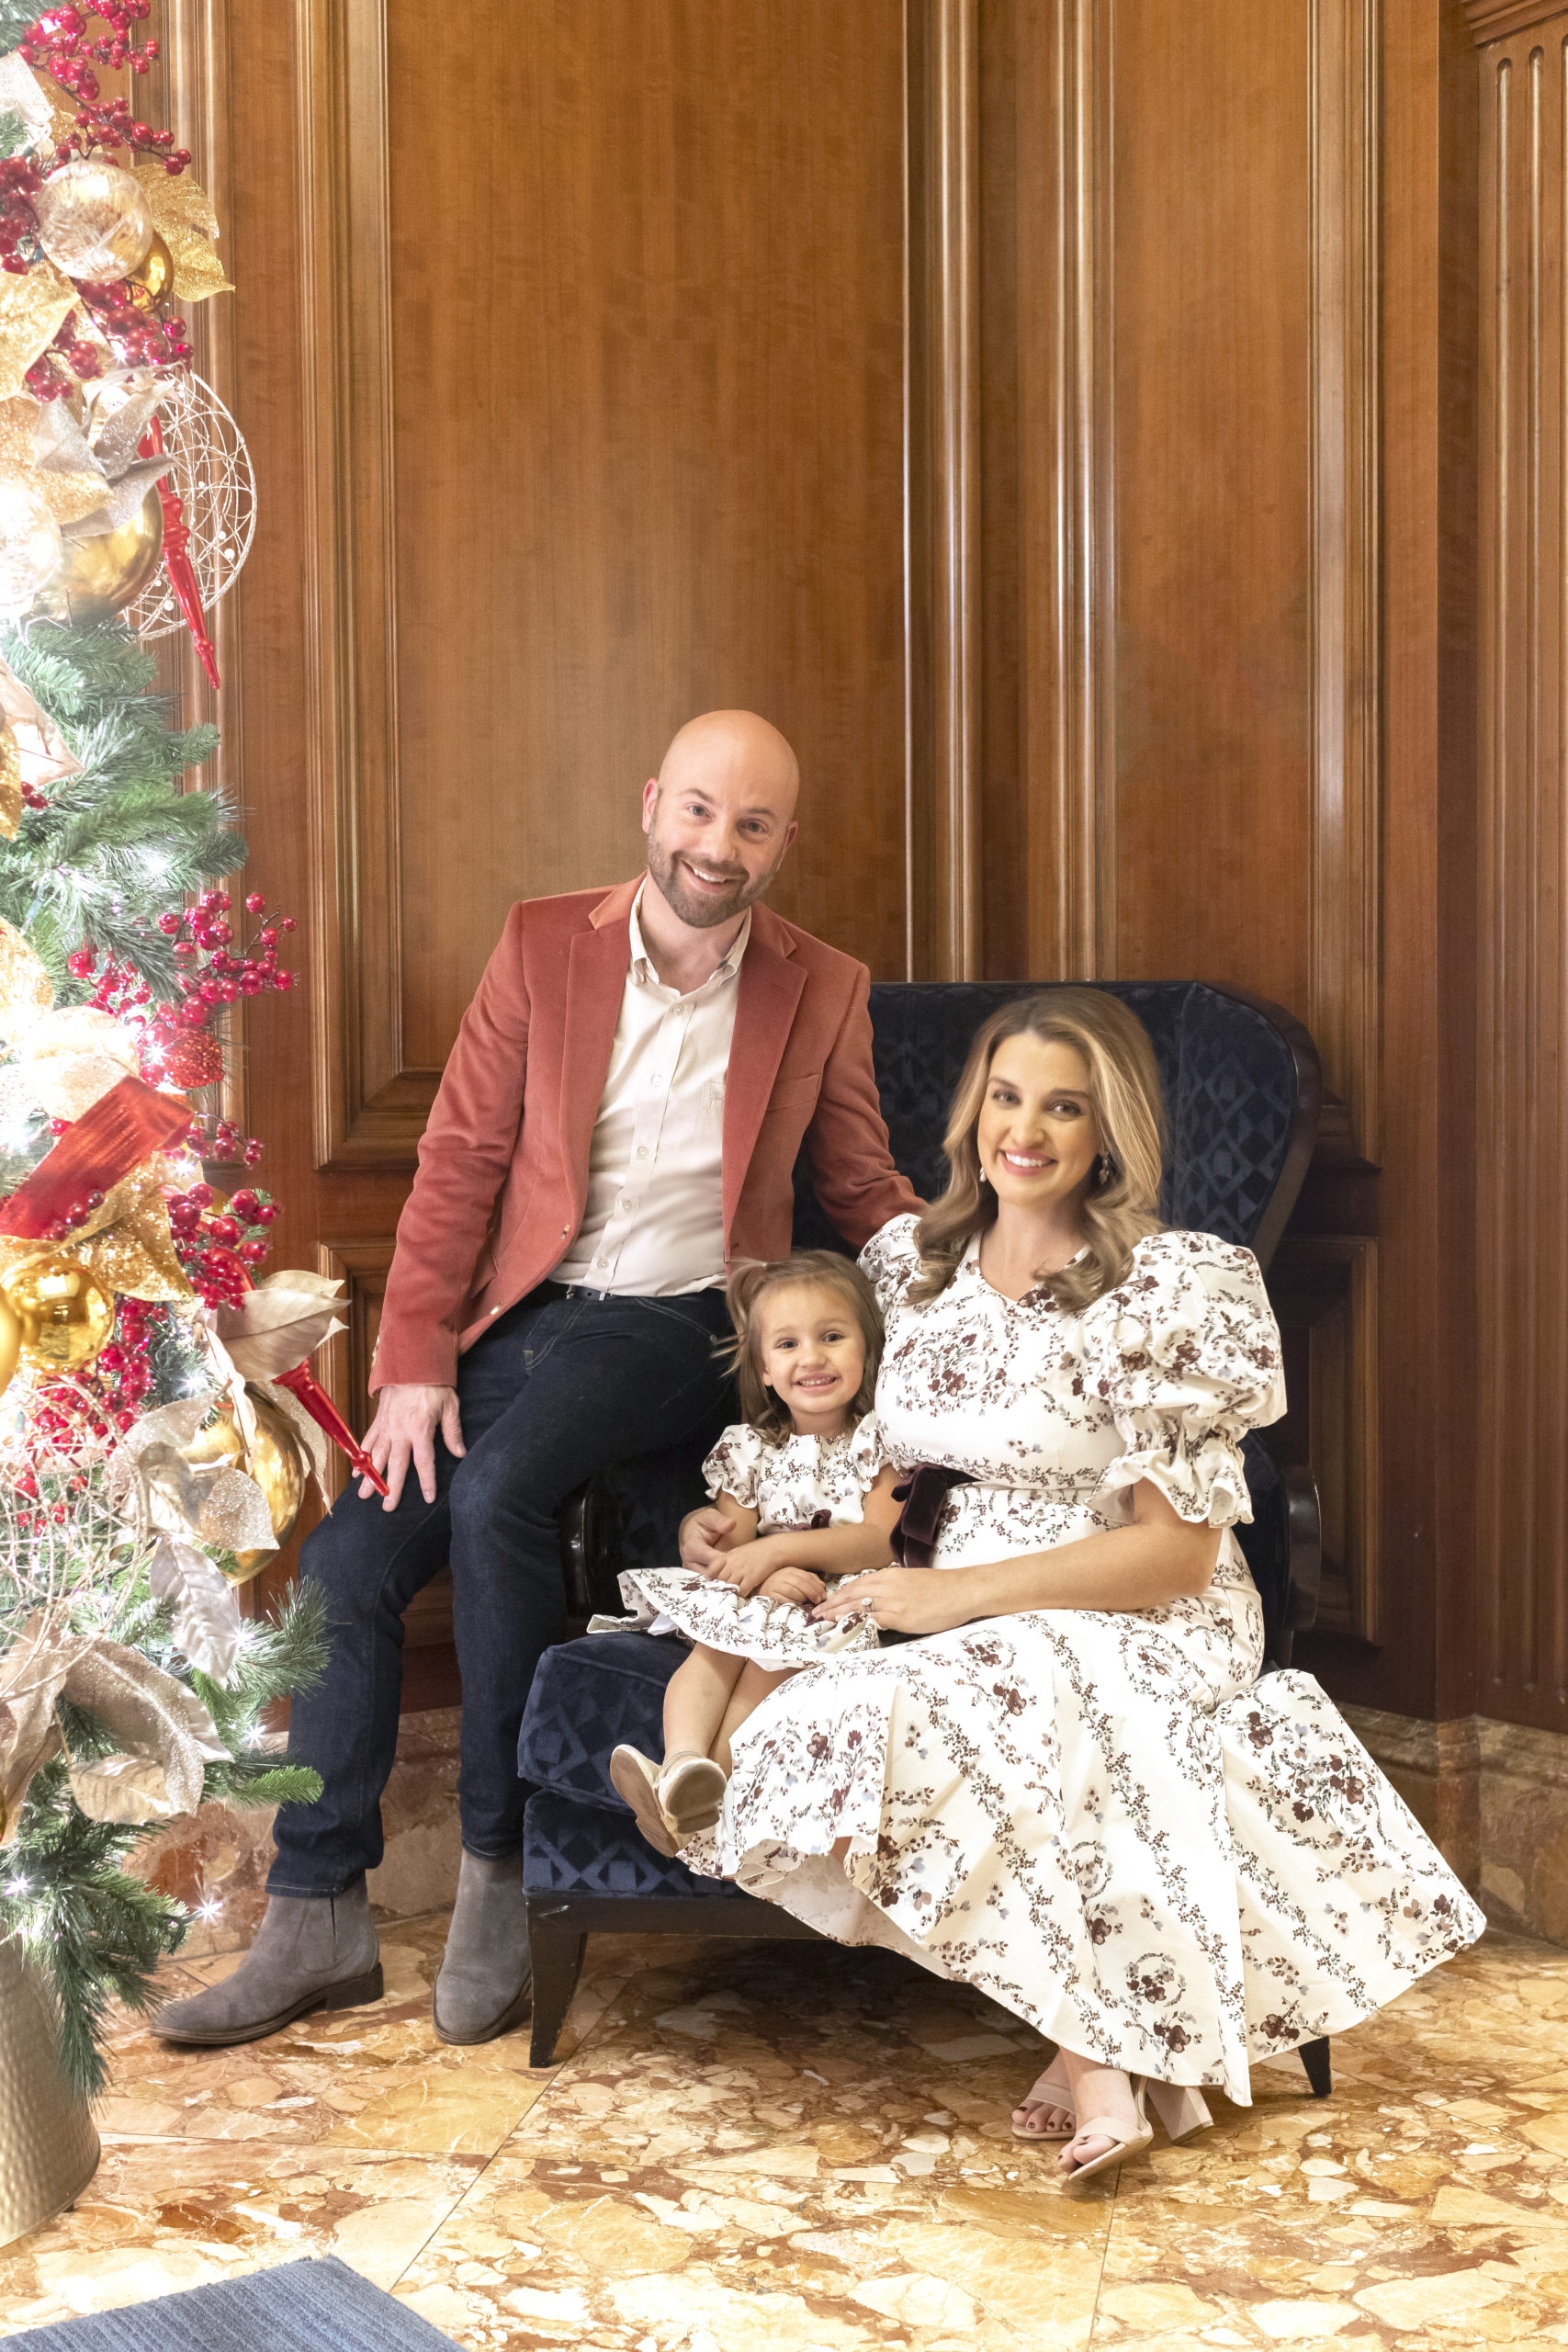 The Benfield family dressed up for Christmas with their family photos at the Ritz-Carlton